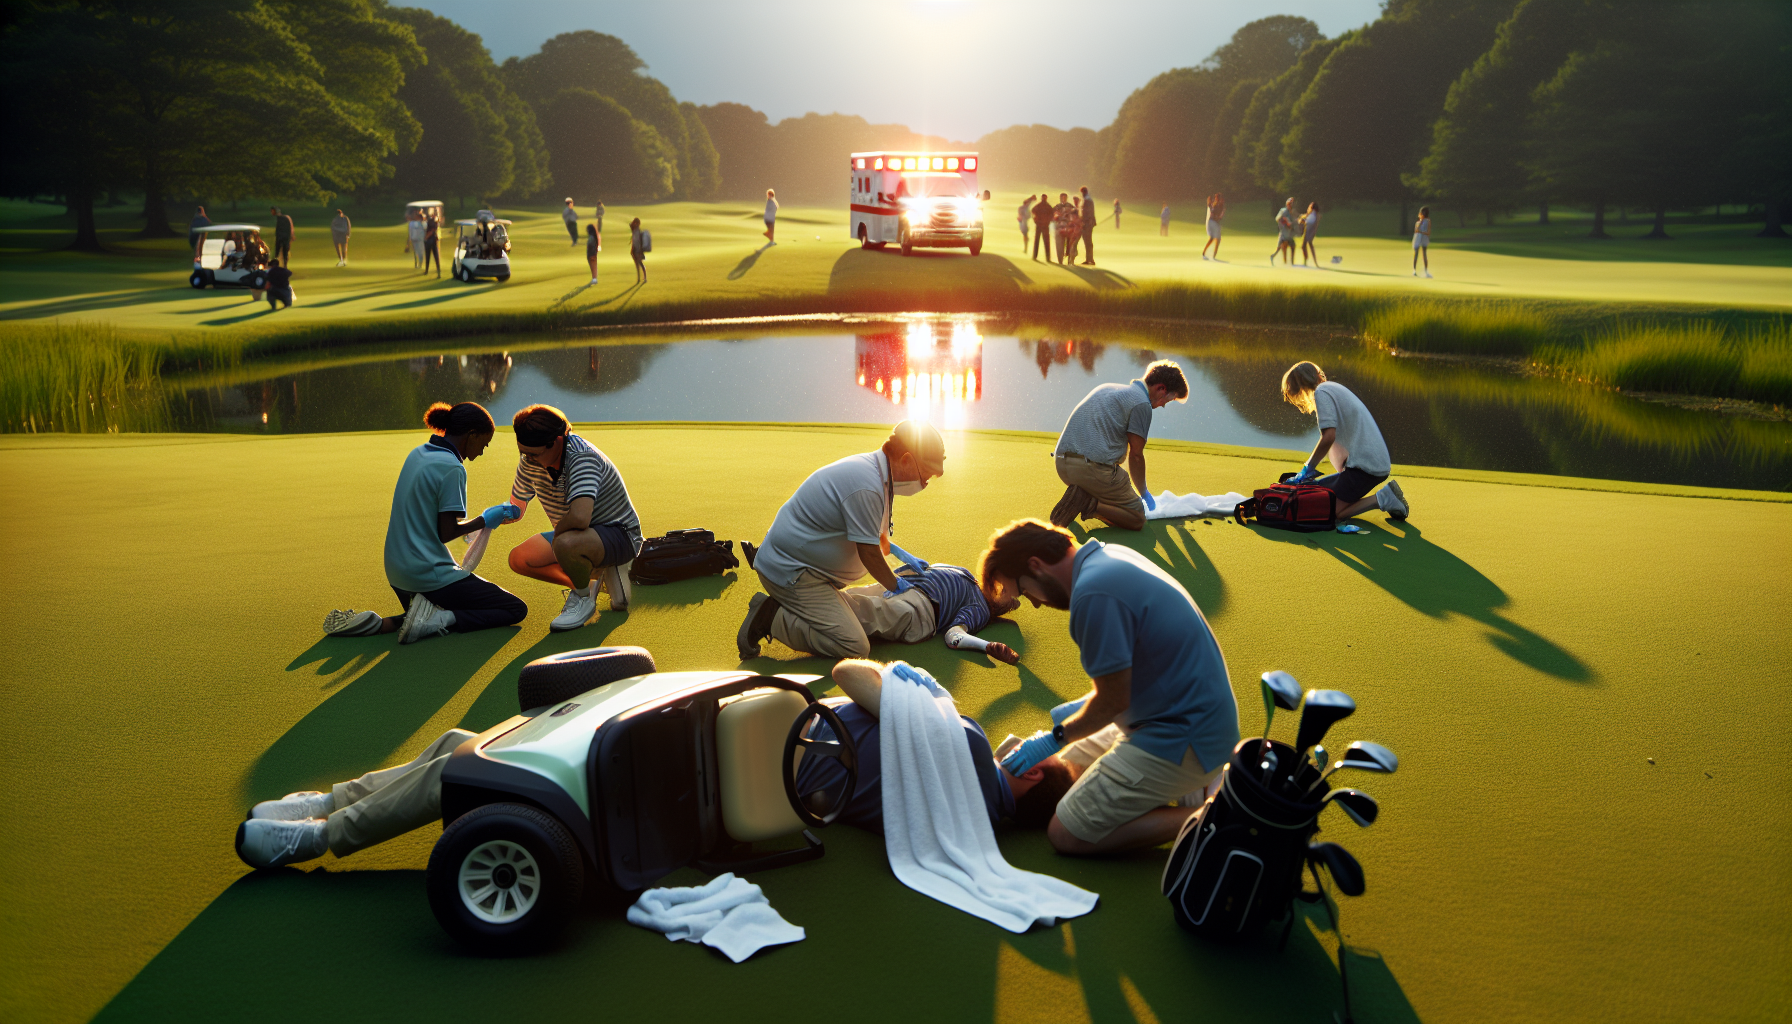 Providing first aid at a golf cart accident site in Georgia